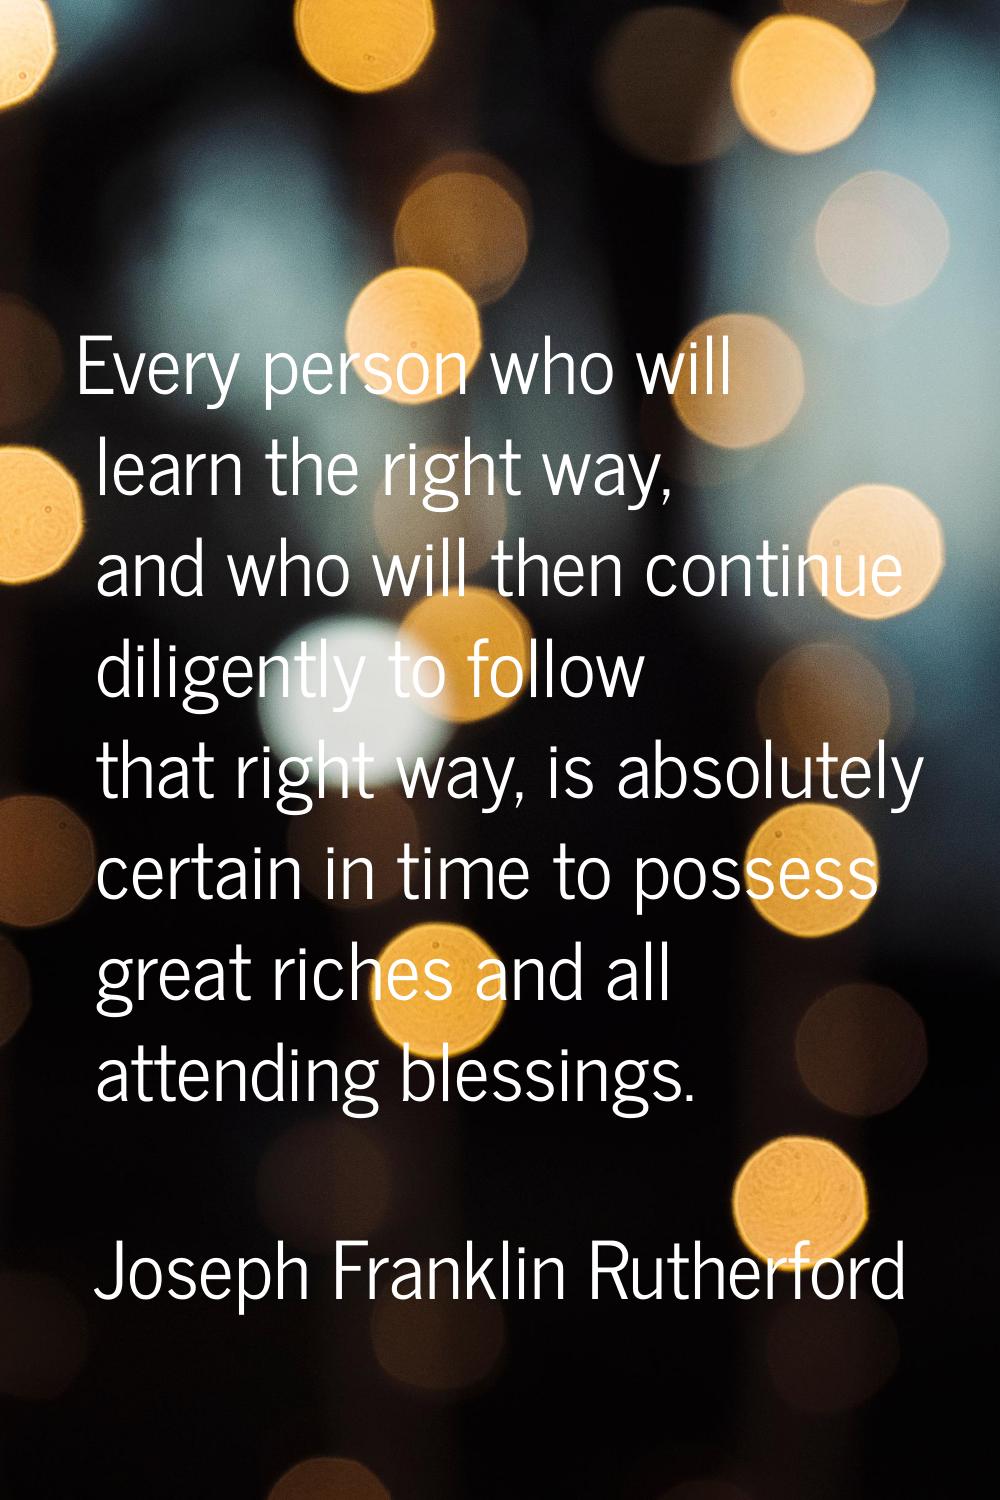 Every person who will learn the right way, and who will then continue diligently to follow that rig